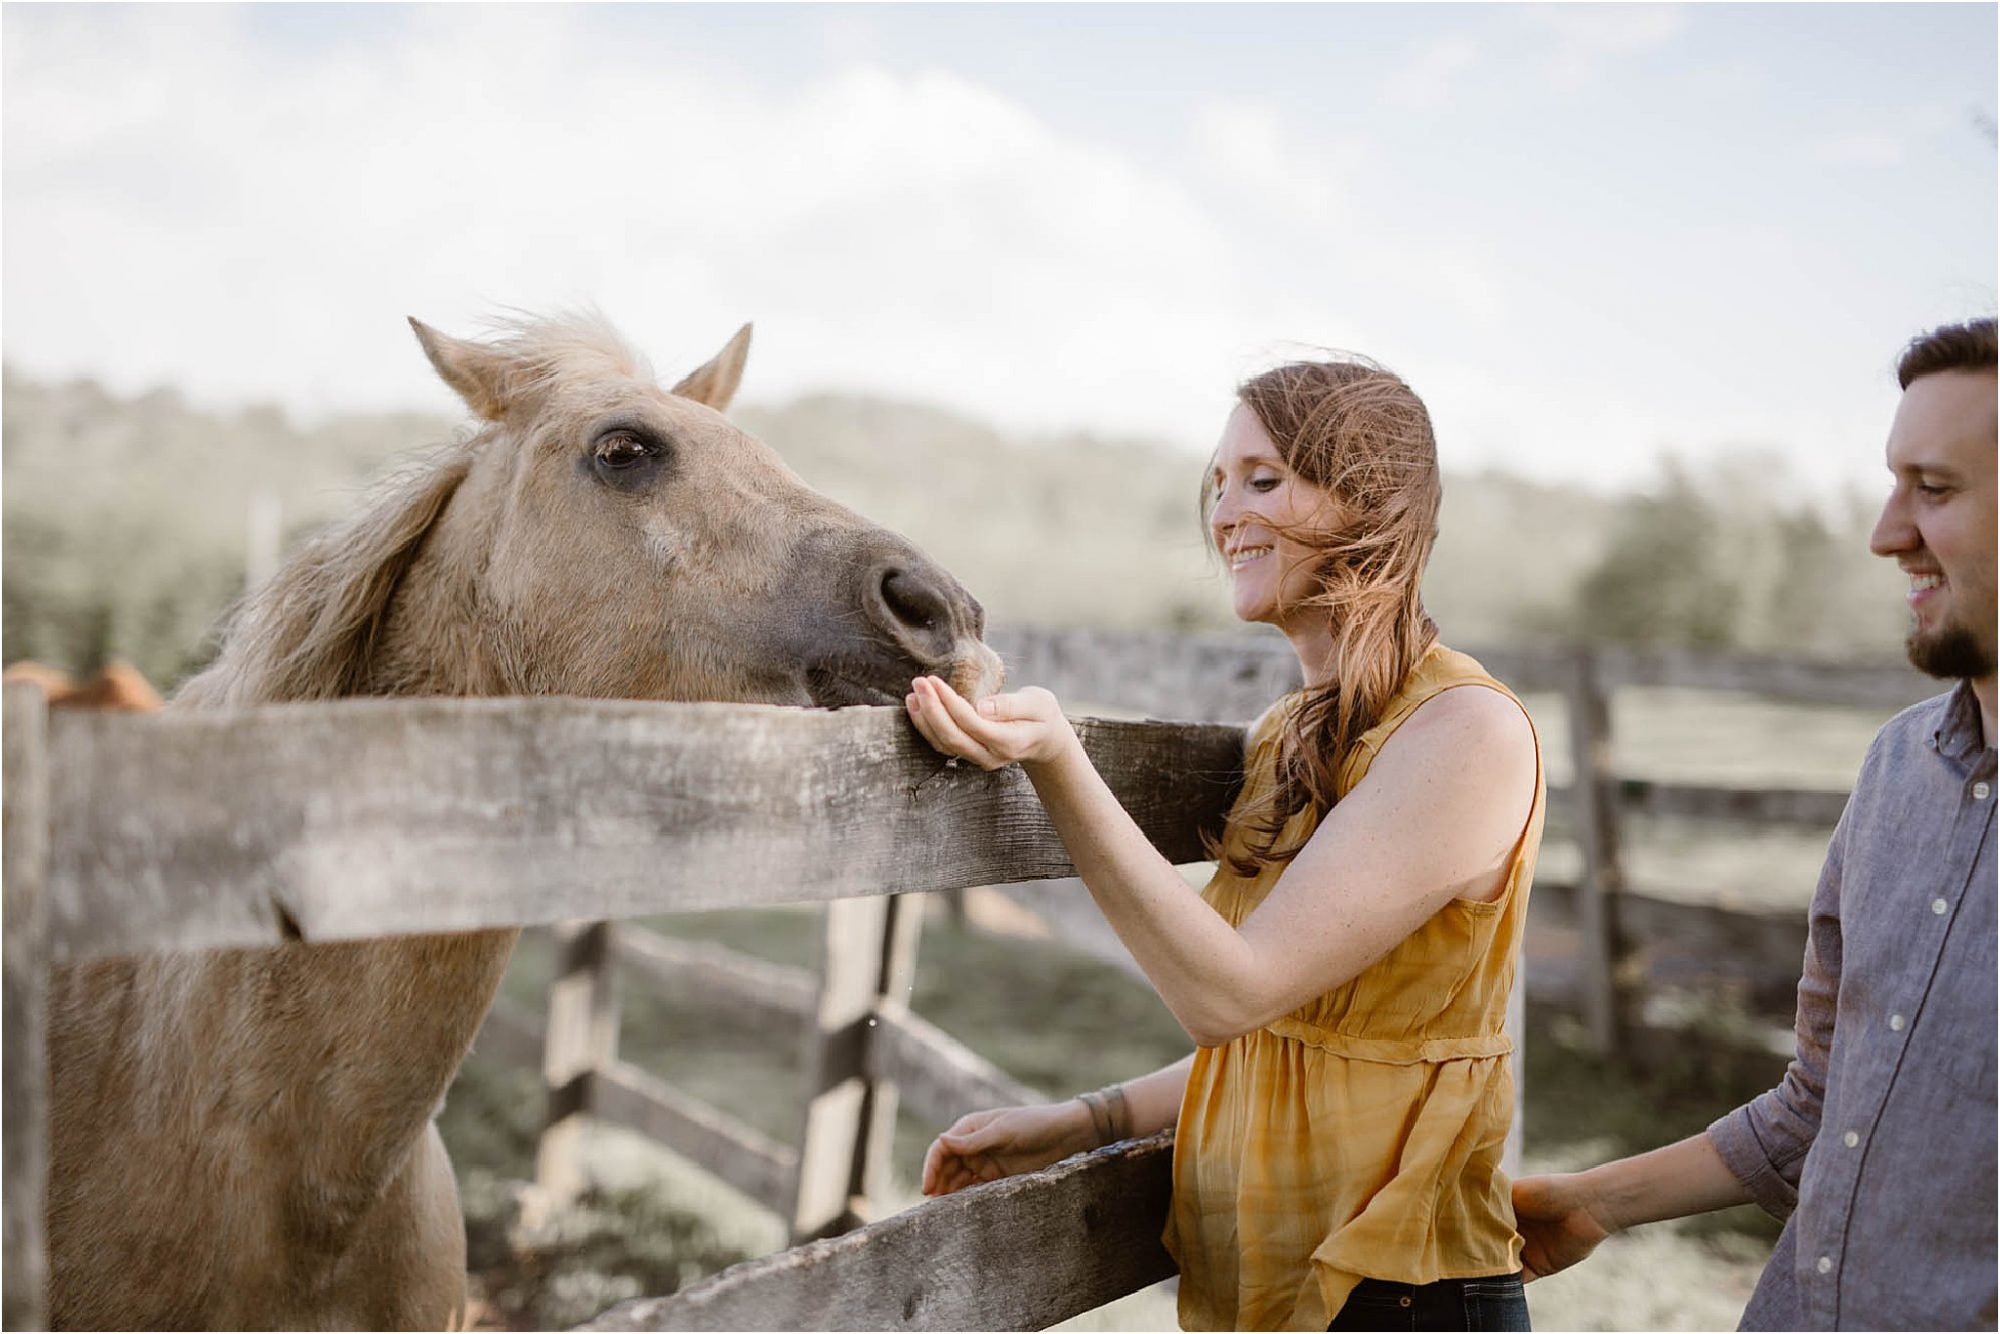 Girl in yellow shirt feeding horse over fence at farm